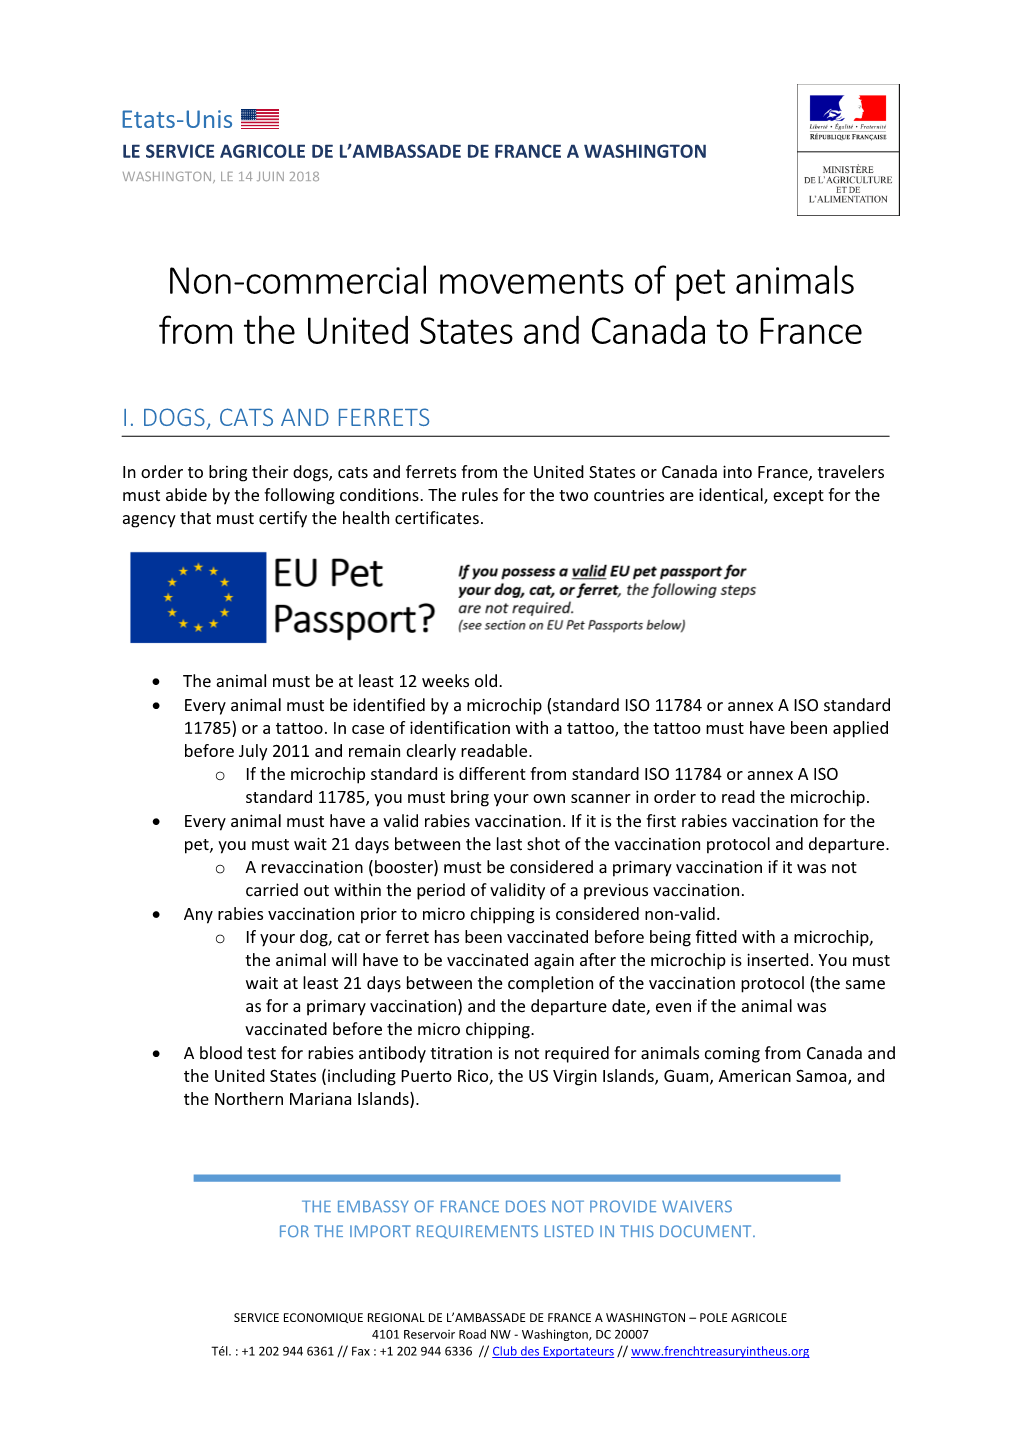 Non-Commercial Movements of Pet Animals from the United States and Canada to France